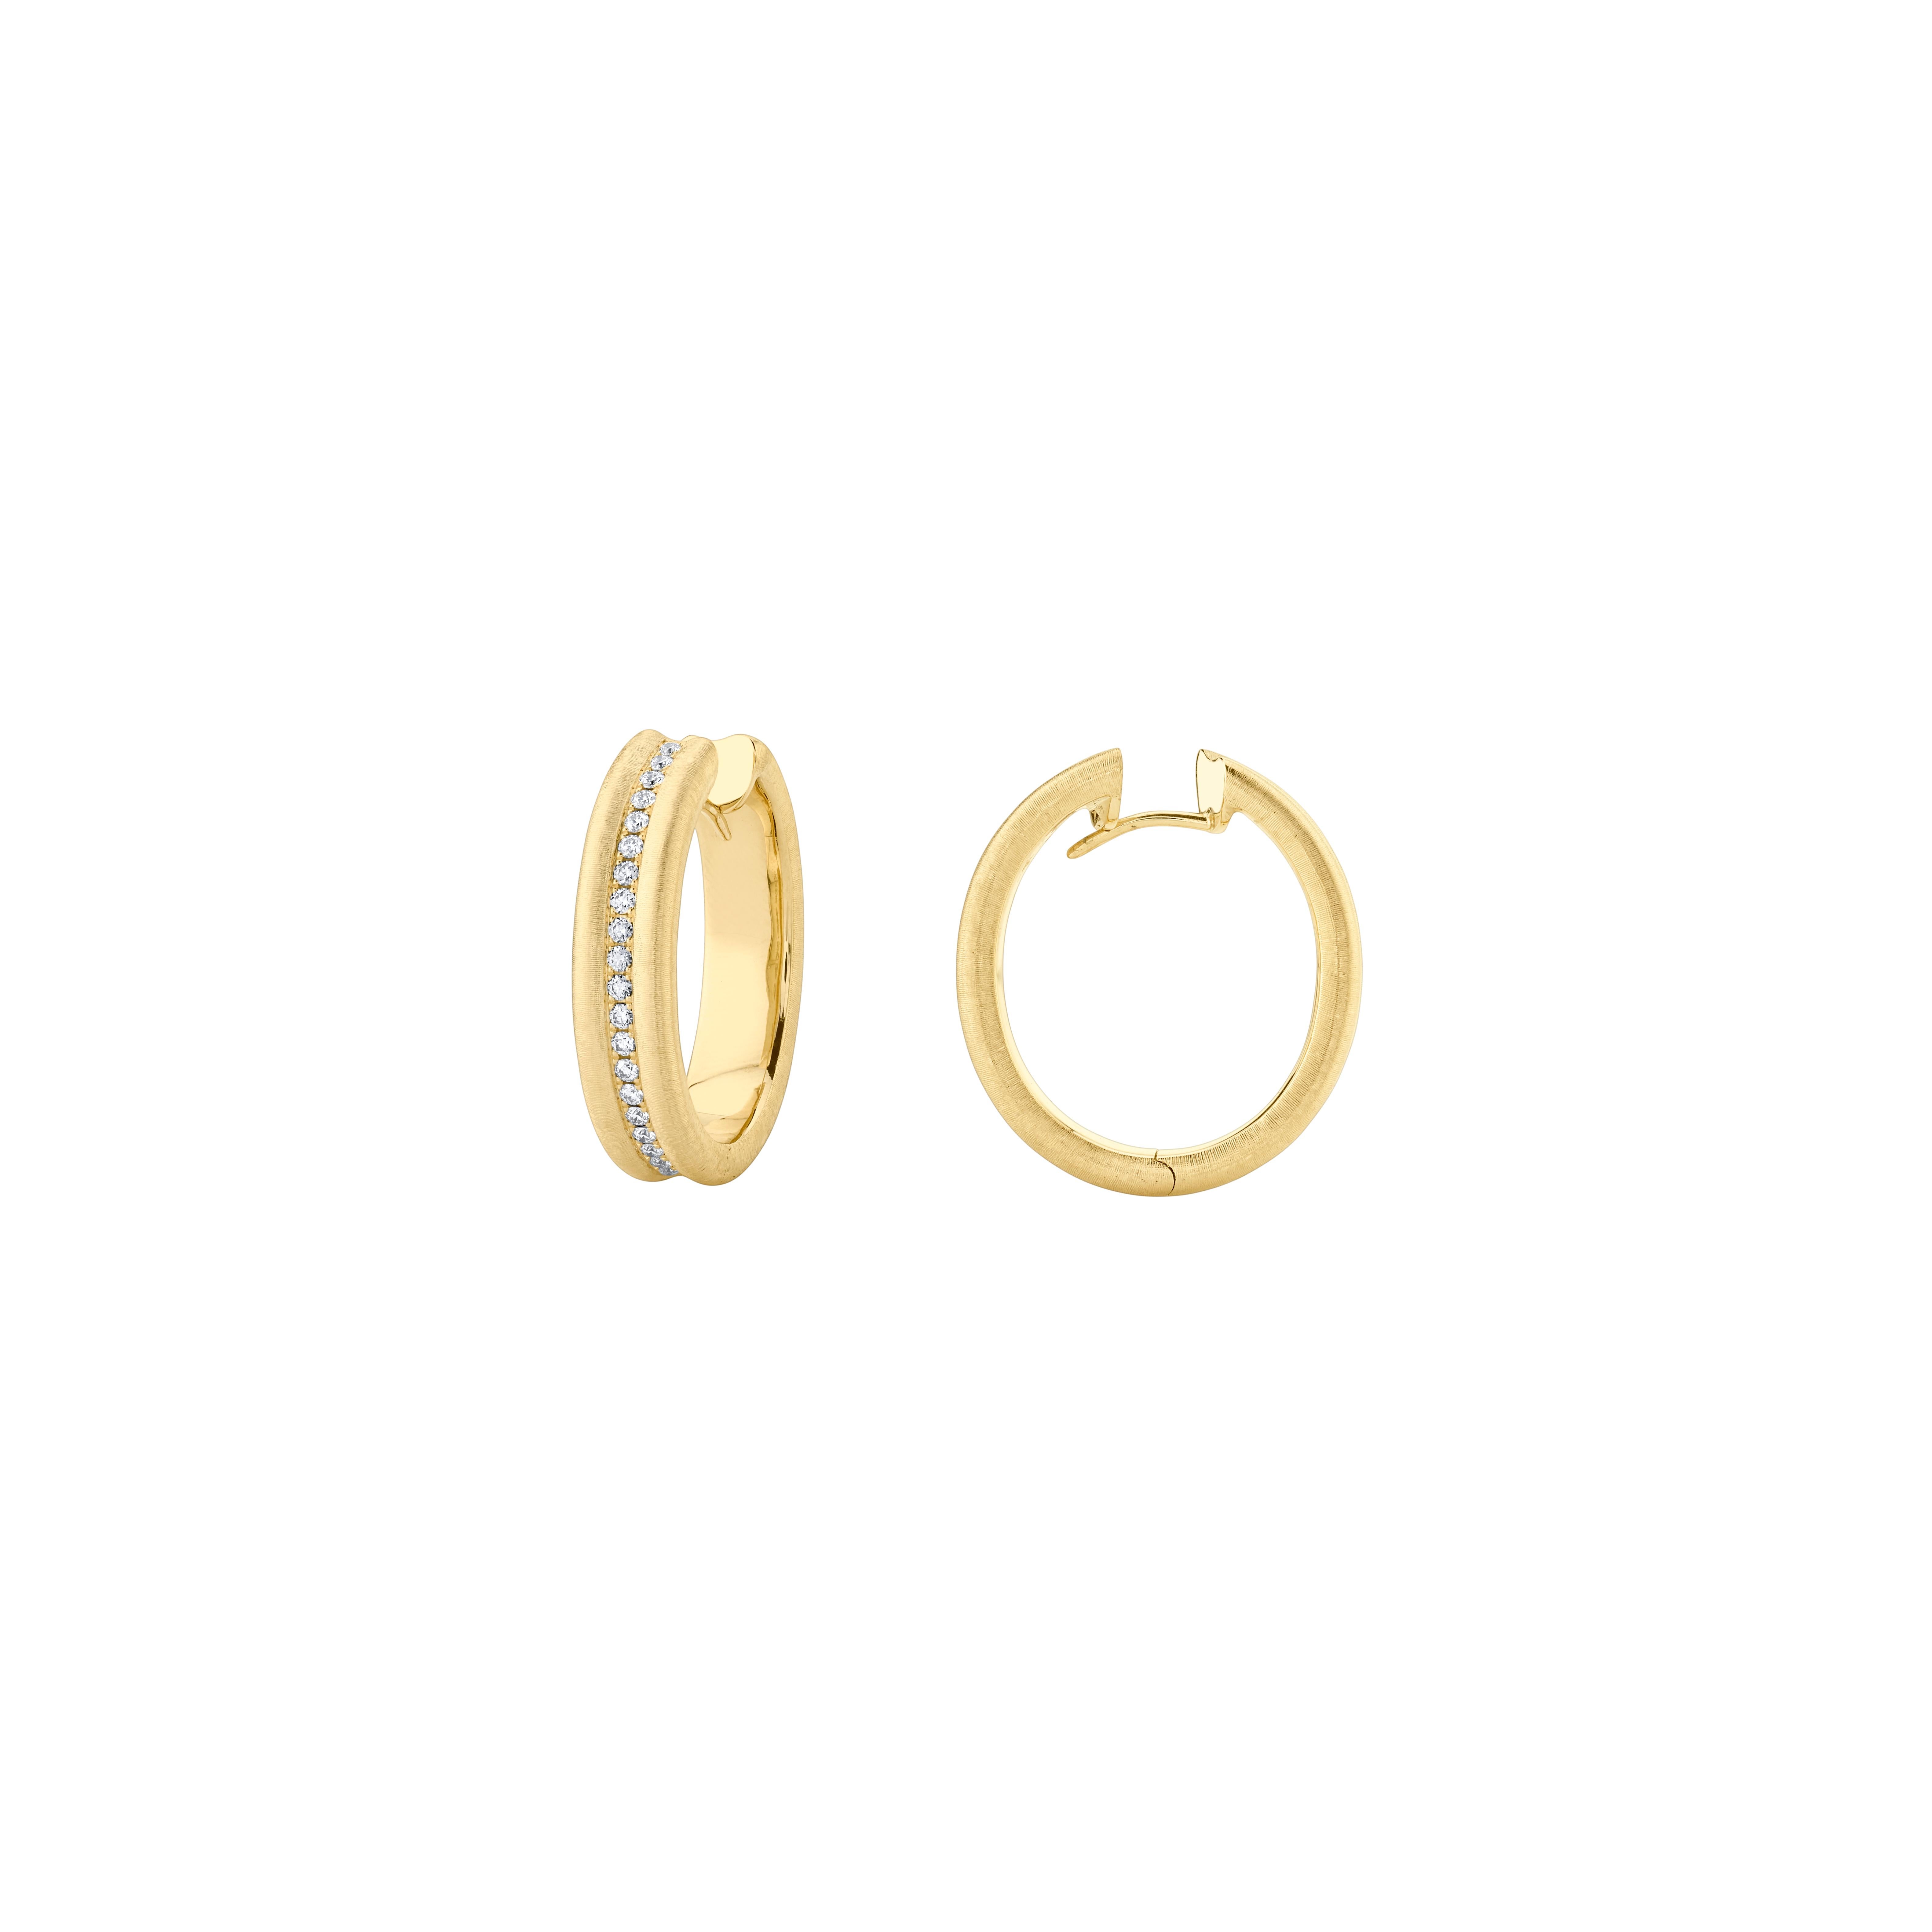 Style #: QH20E.
SYLVIA KONTENTE  18K Yellow gold diamond hoop earrings with hand-engraved finish.
Precision-cut, round brilliant diamonds.
Diamond total weight: 0.37ct tw.
Diamond color/clarity: DEF/VVS VS.
Hand-engraved finish - The ancient art of